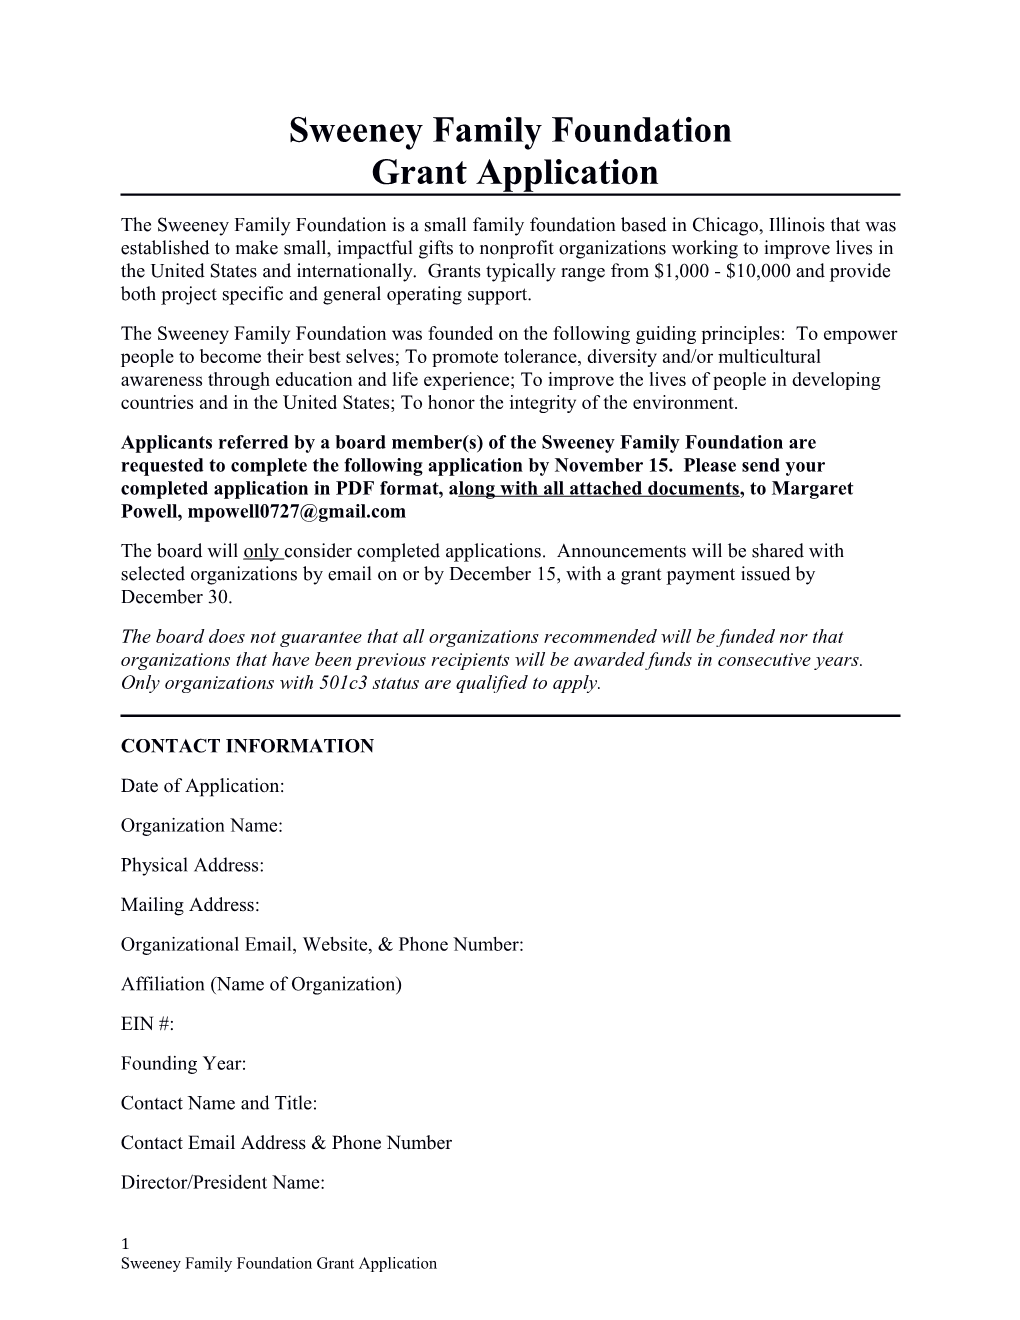 Sweeney Family Foundation Grant Application